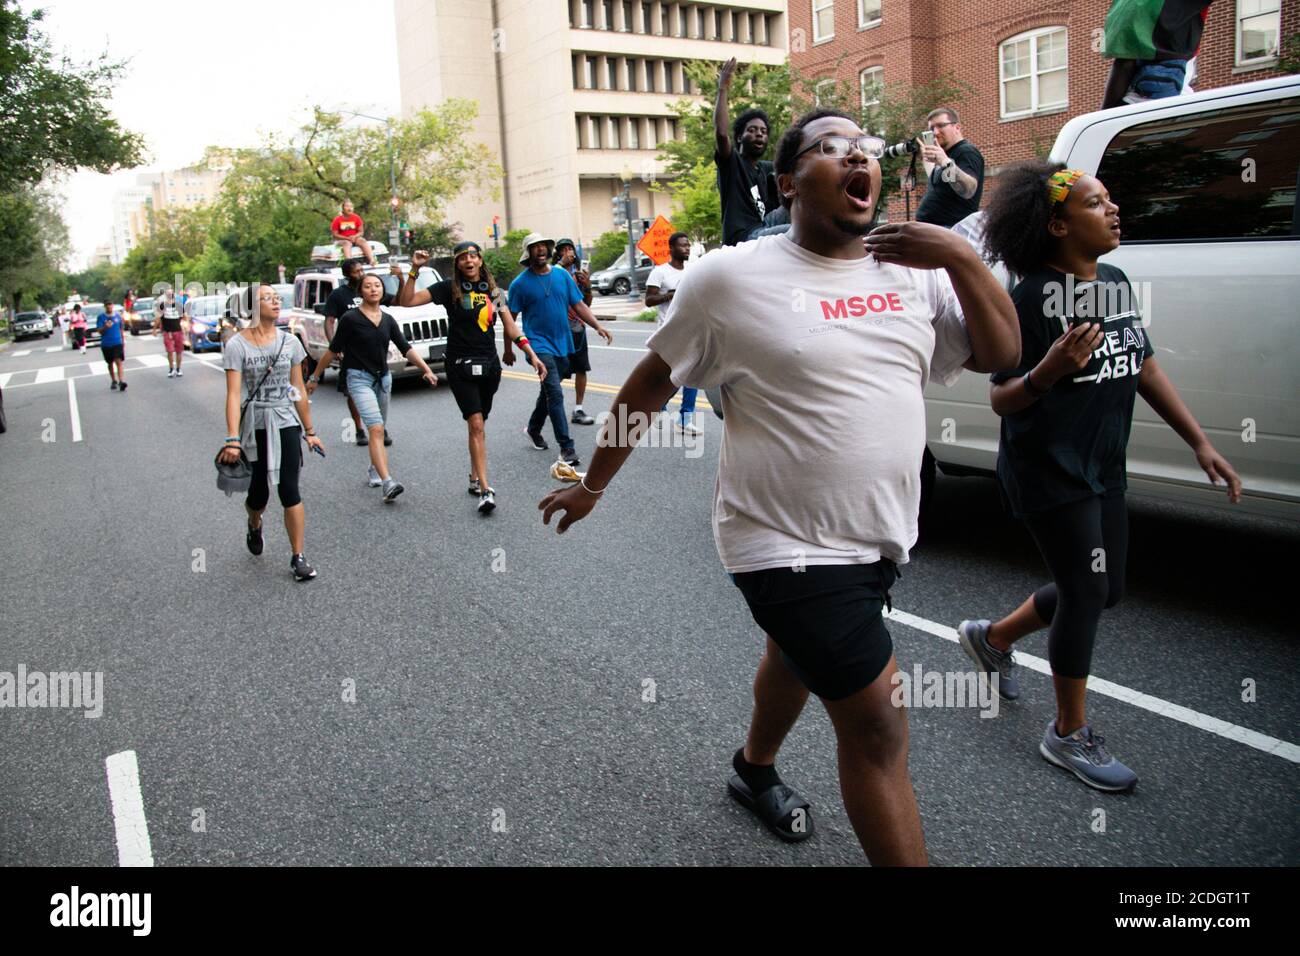 A protest march organized by activist Frank Nitty that started in Milwaukee arrives in Washington after more than 700 miles of walking before the beginning of civil rights march organized by Al Sharpton to call attention to systemic racism and police violence after the May police killing of George Floyd in Minnesota, in Washington, D.C., on August 28, 2020, amid the coronavirus pandemic. The night before The Commitment March: Get Your Knee Off Our Necks, protests consumed the blocks surrounding the White House, as President Trump gave his presidential nomination acceptance speech with sounds f Stock Photo